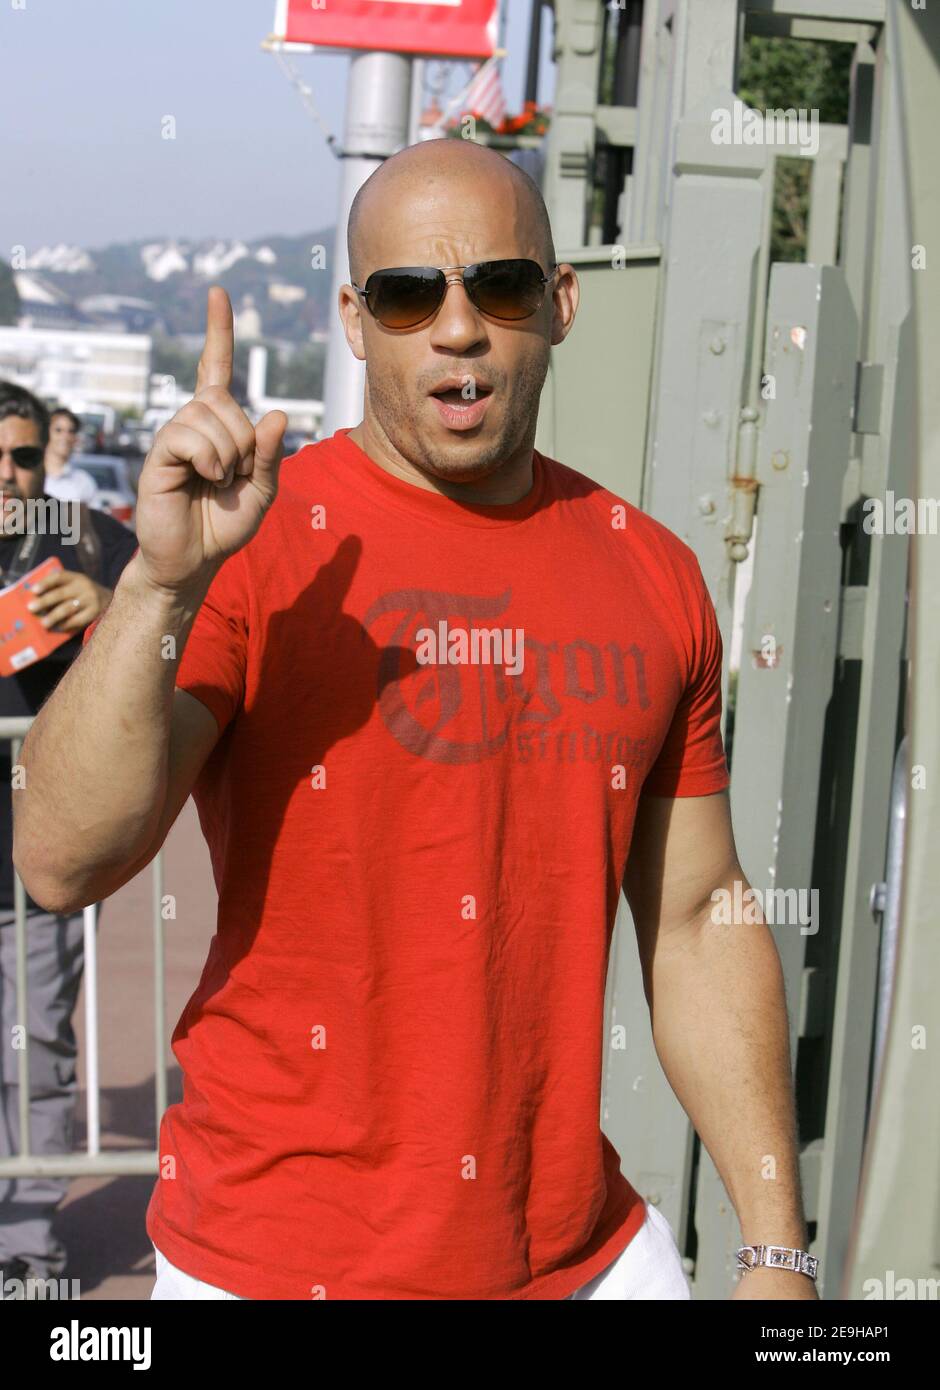 American actor Vin Diesel on his way to the photocall for 'Find me guilty',  at 32nd Deauville American Film Festival in Deauville, Normandy, France, on  September 6, 2006. Photo by Nikola Kis